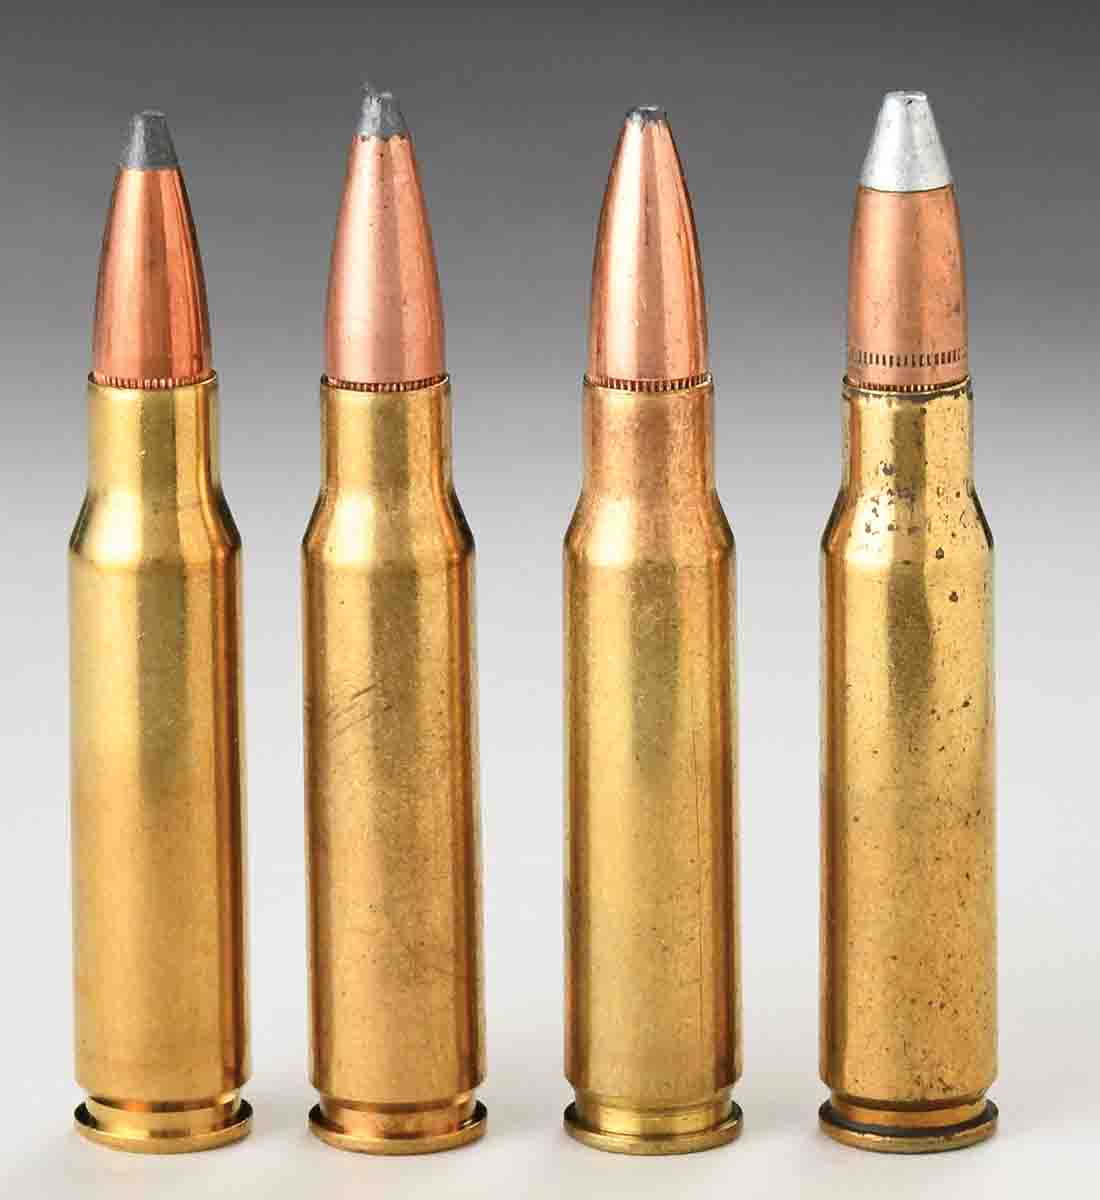 Some sources report that factory rounds can be measured for case expansion and then the handloader can use this measurement as a “do not exceed” level for load testing. These are the four factory rounds measured for case expansion.